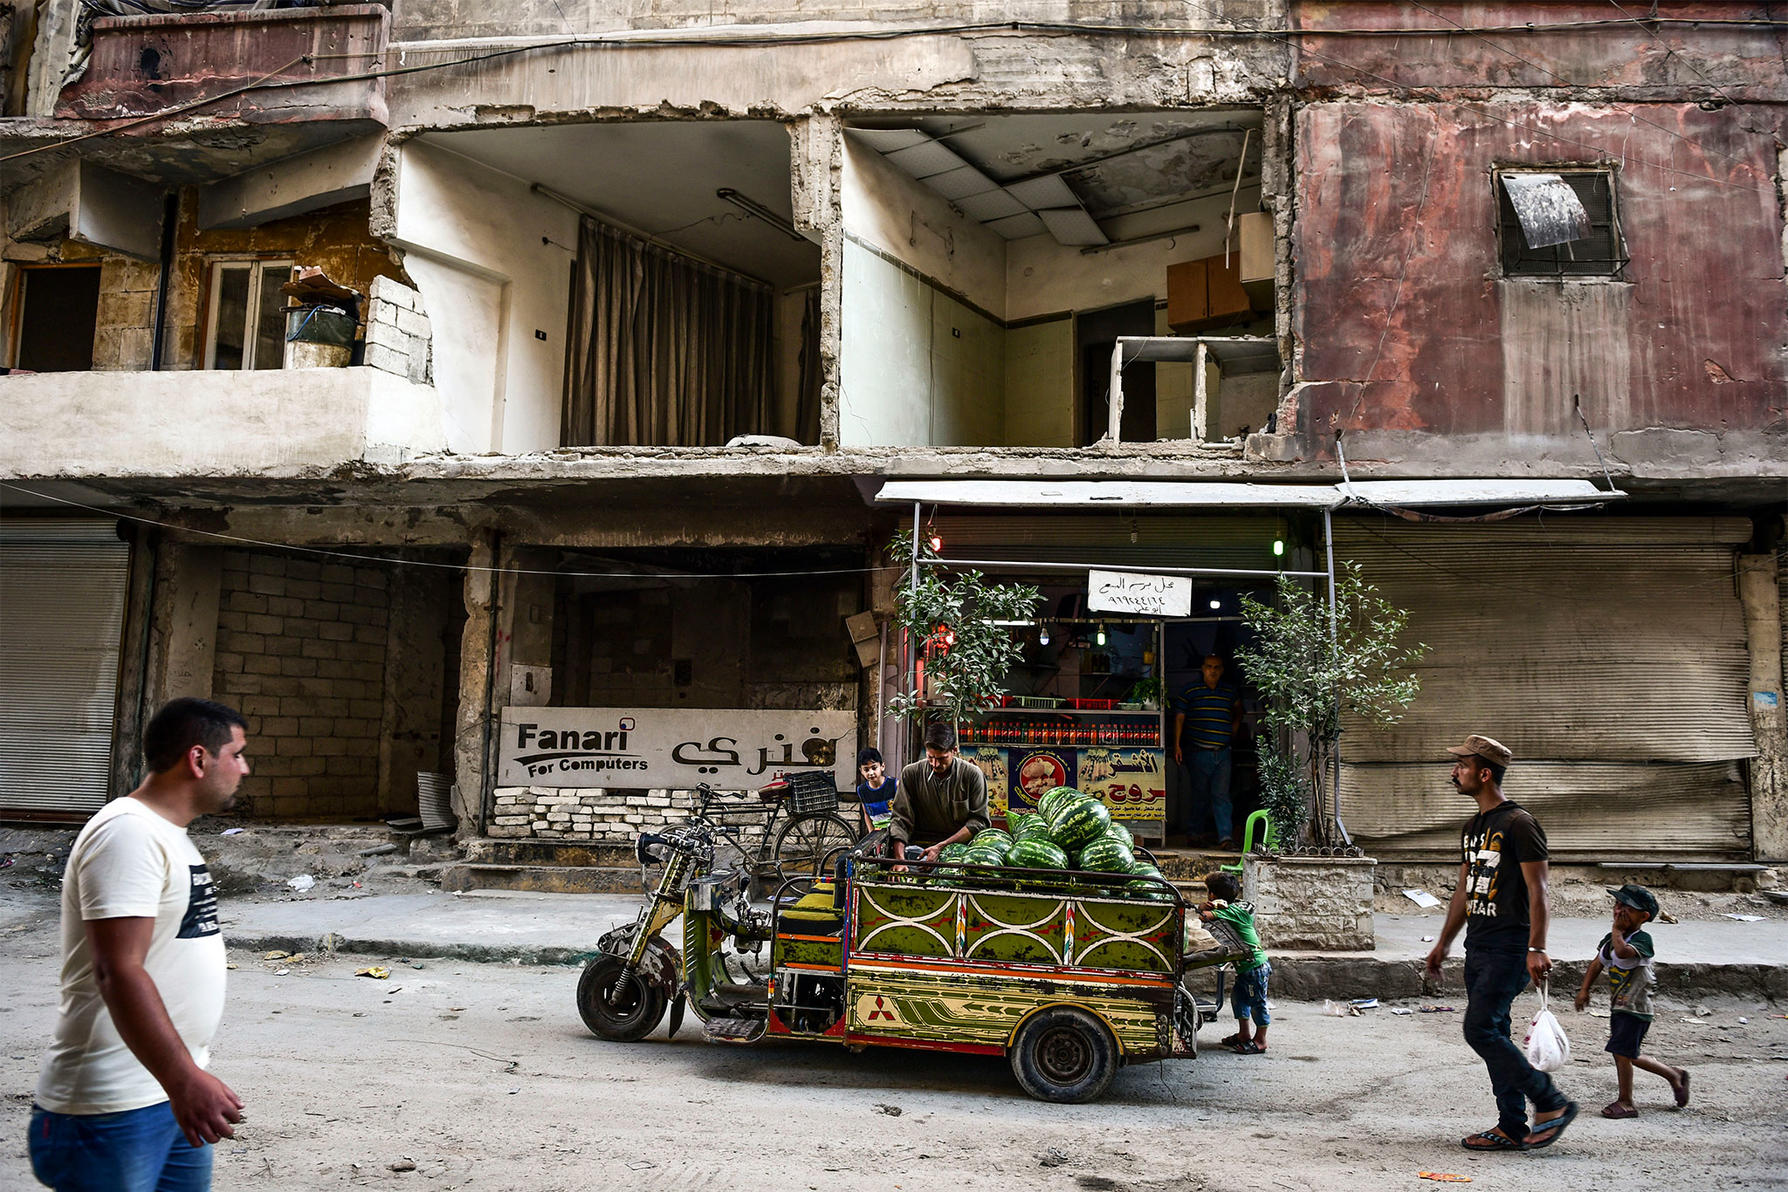 A man selling watermelon in front of buildings destroyed by government forces in eastern Aleppo, Syria, June 23, 2019. (Meridith Kohut/The New York Times)